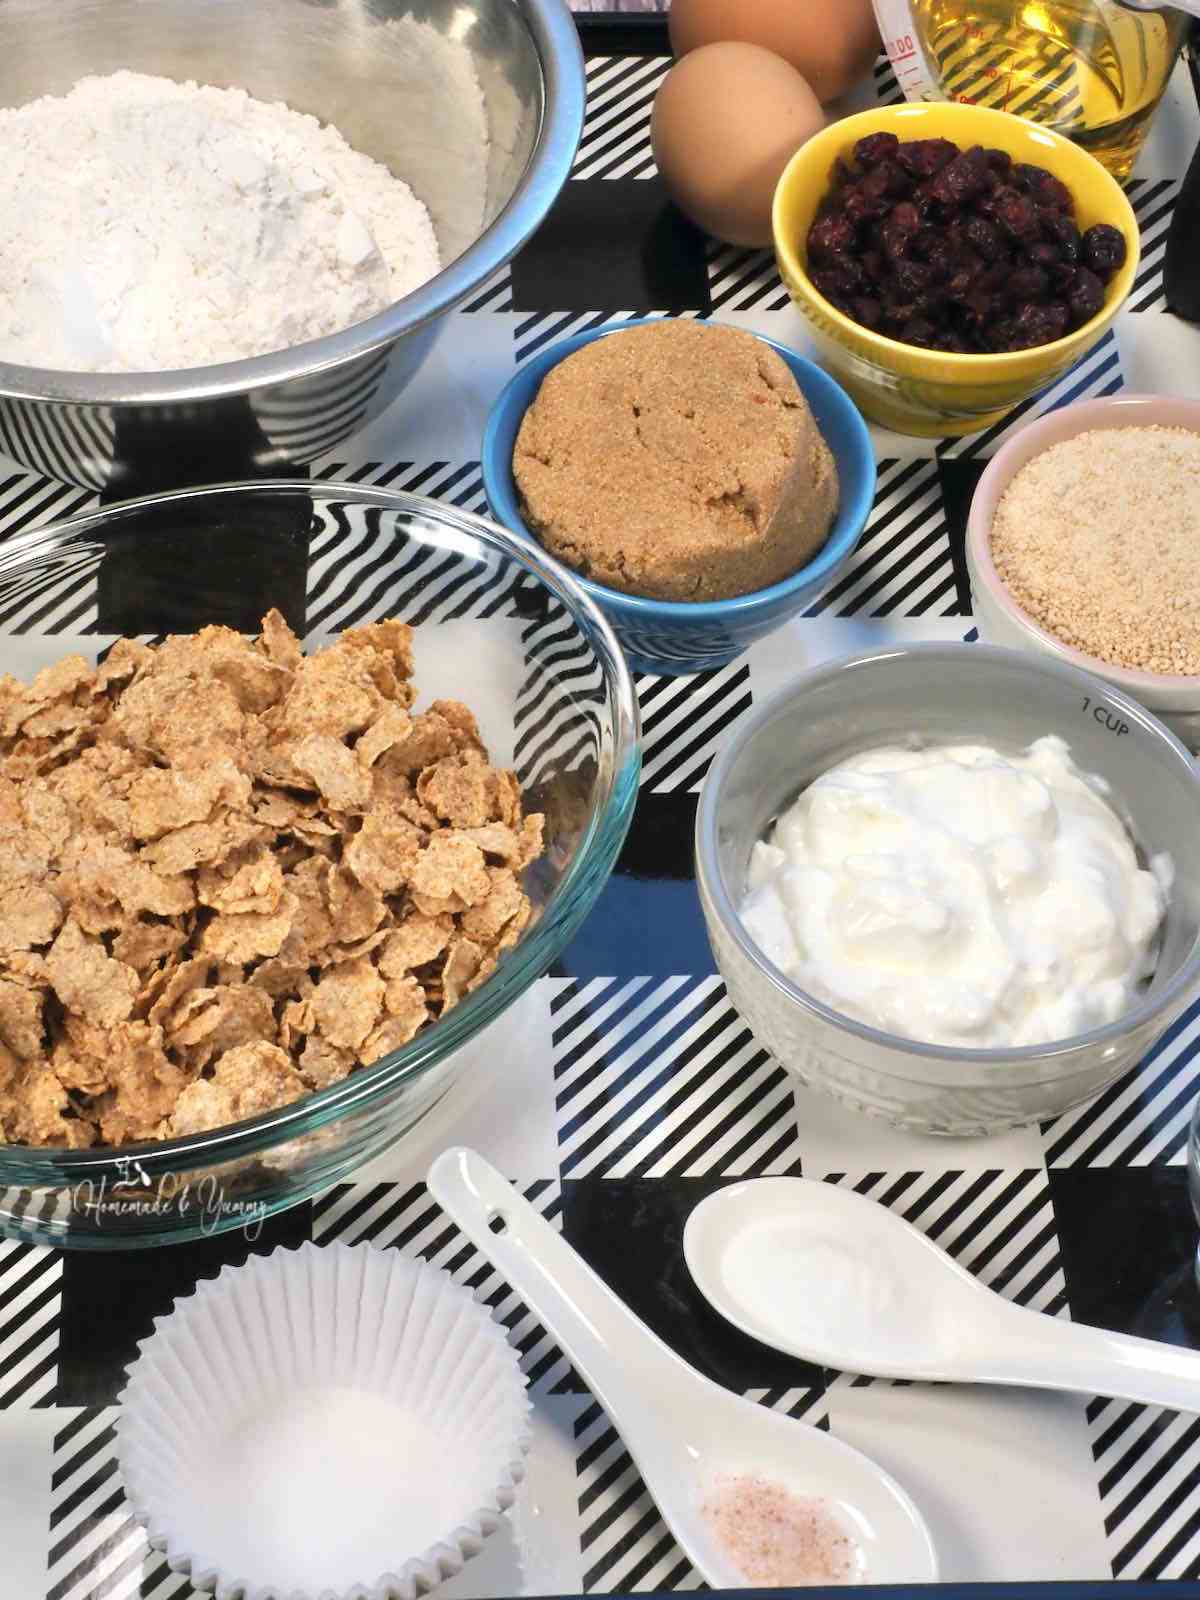 Ingredients to make muffins with bran flakes and cranberries.